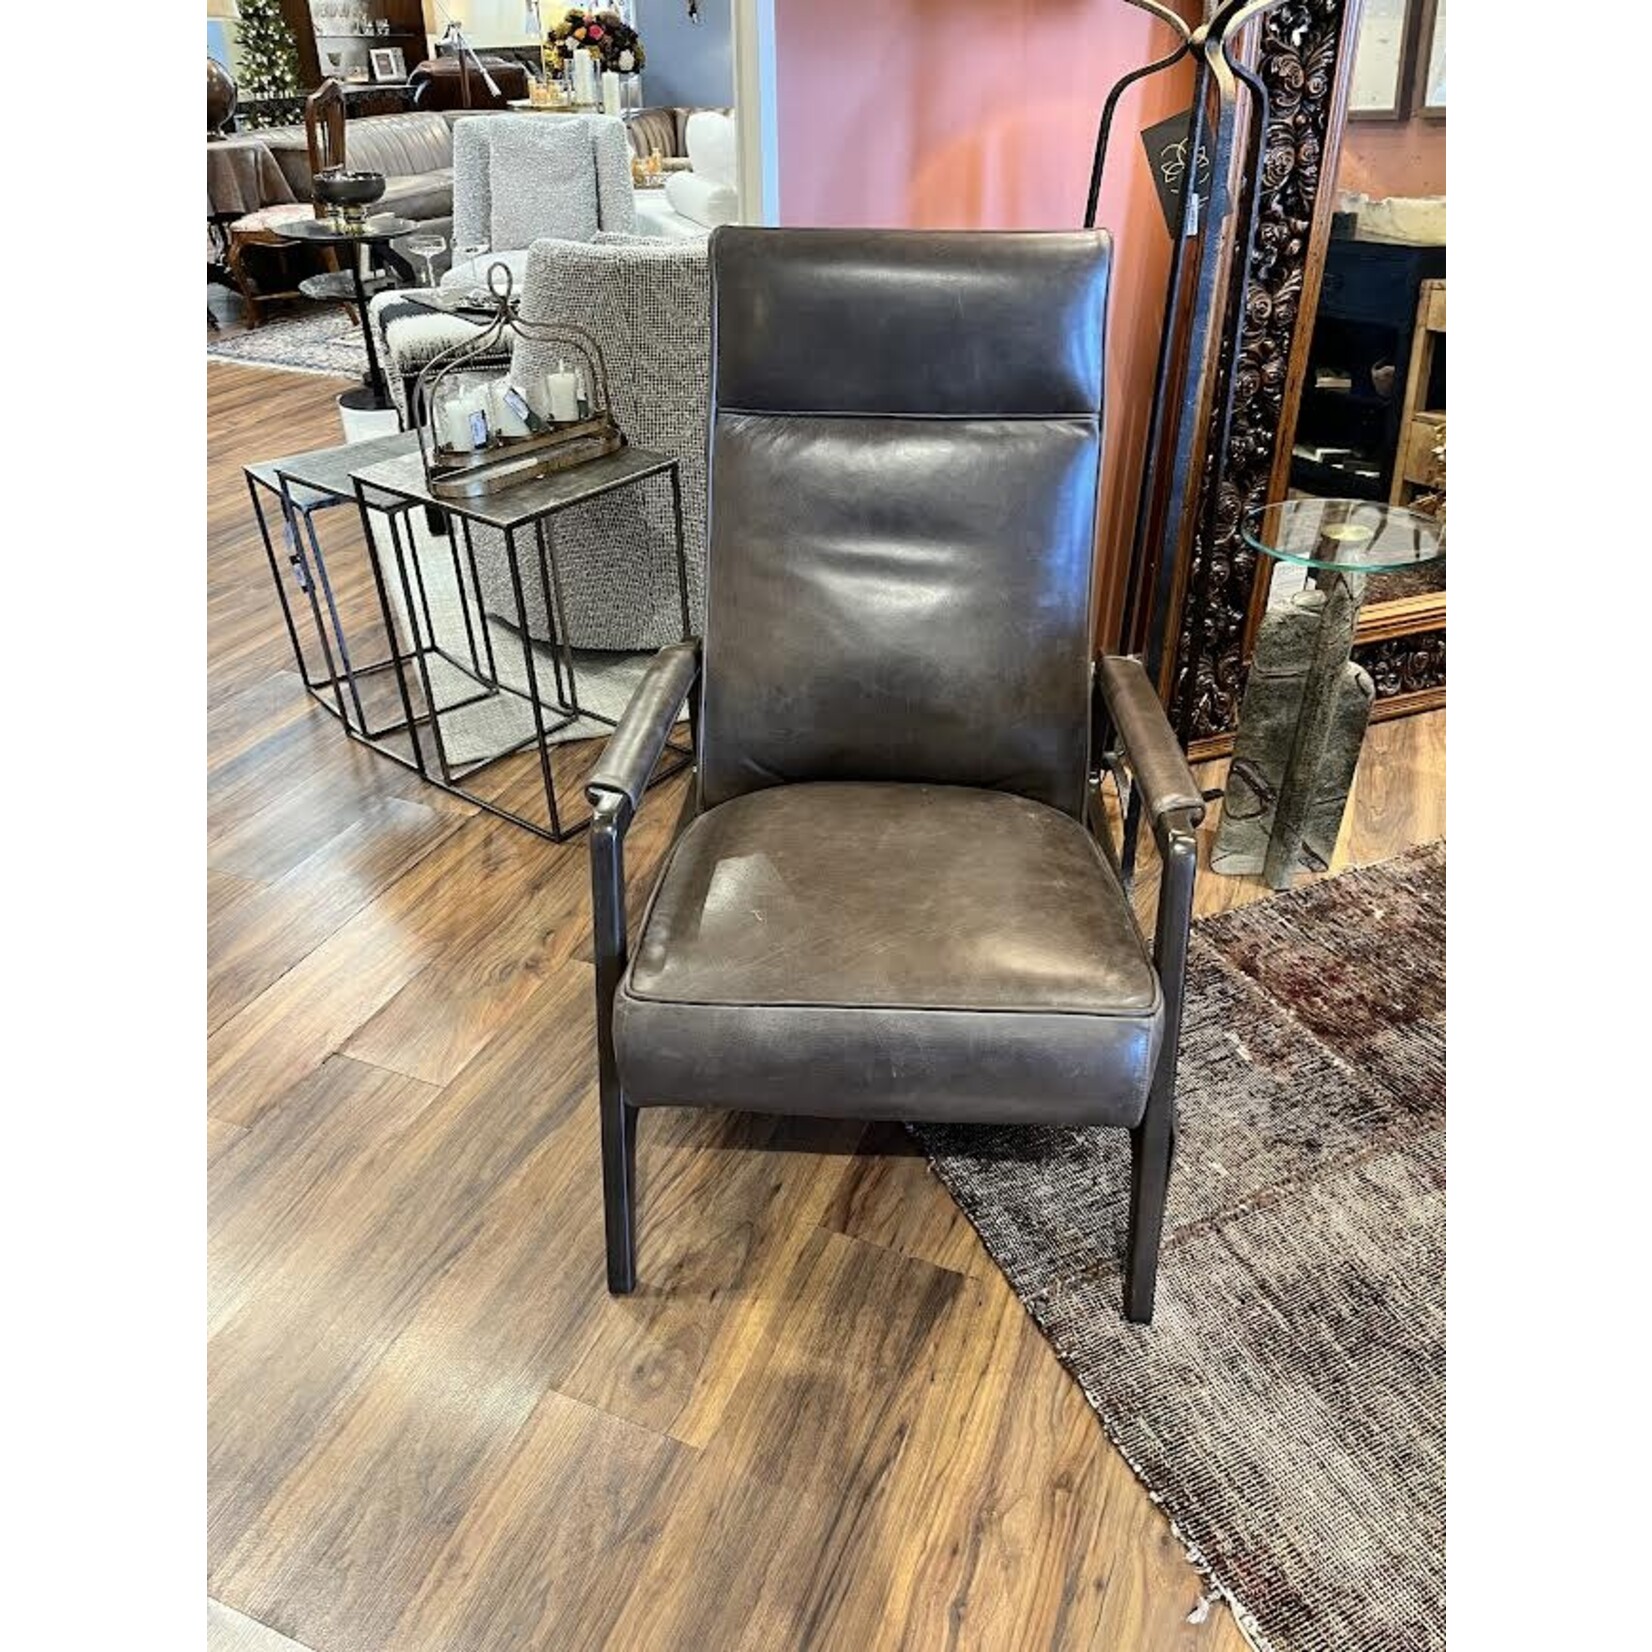 Vanguard Furniture Woodley Recliner Southwick Charcoal Leather